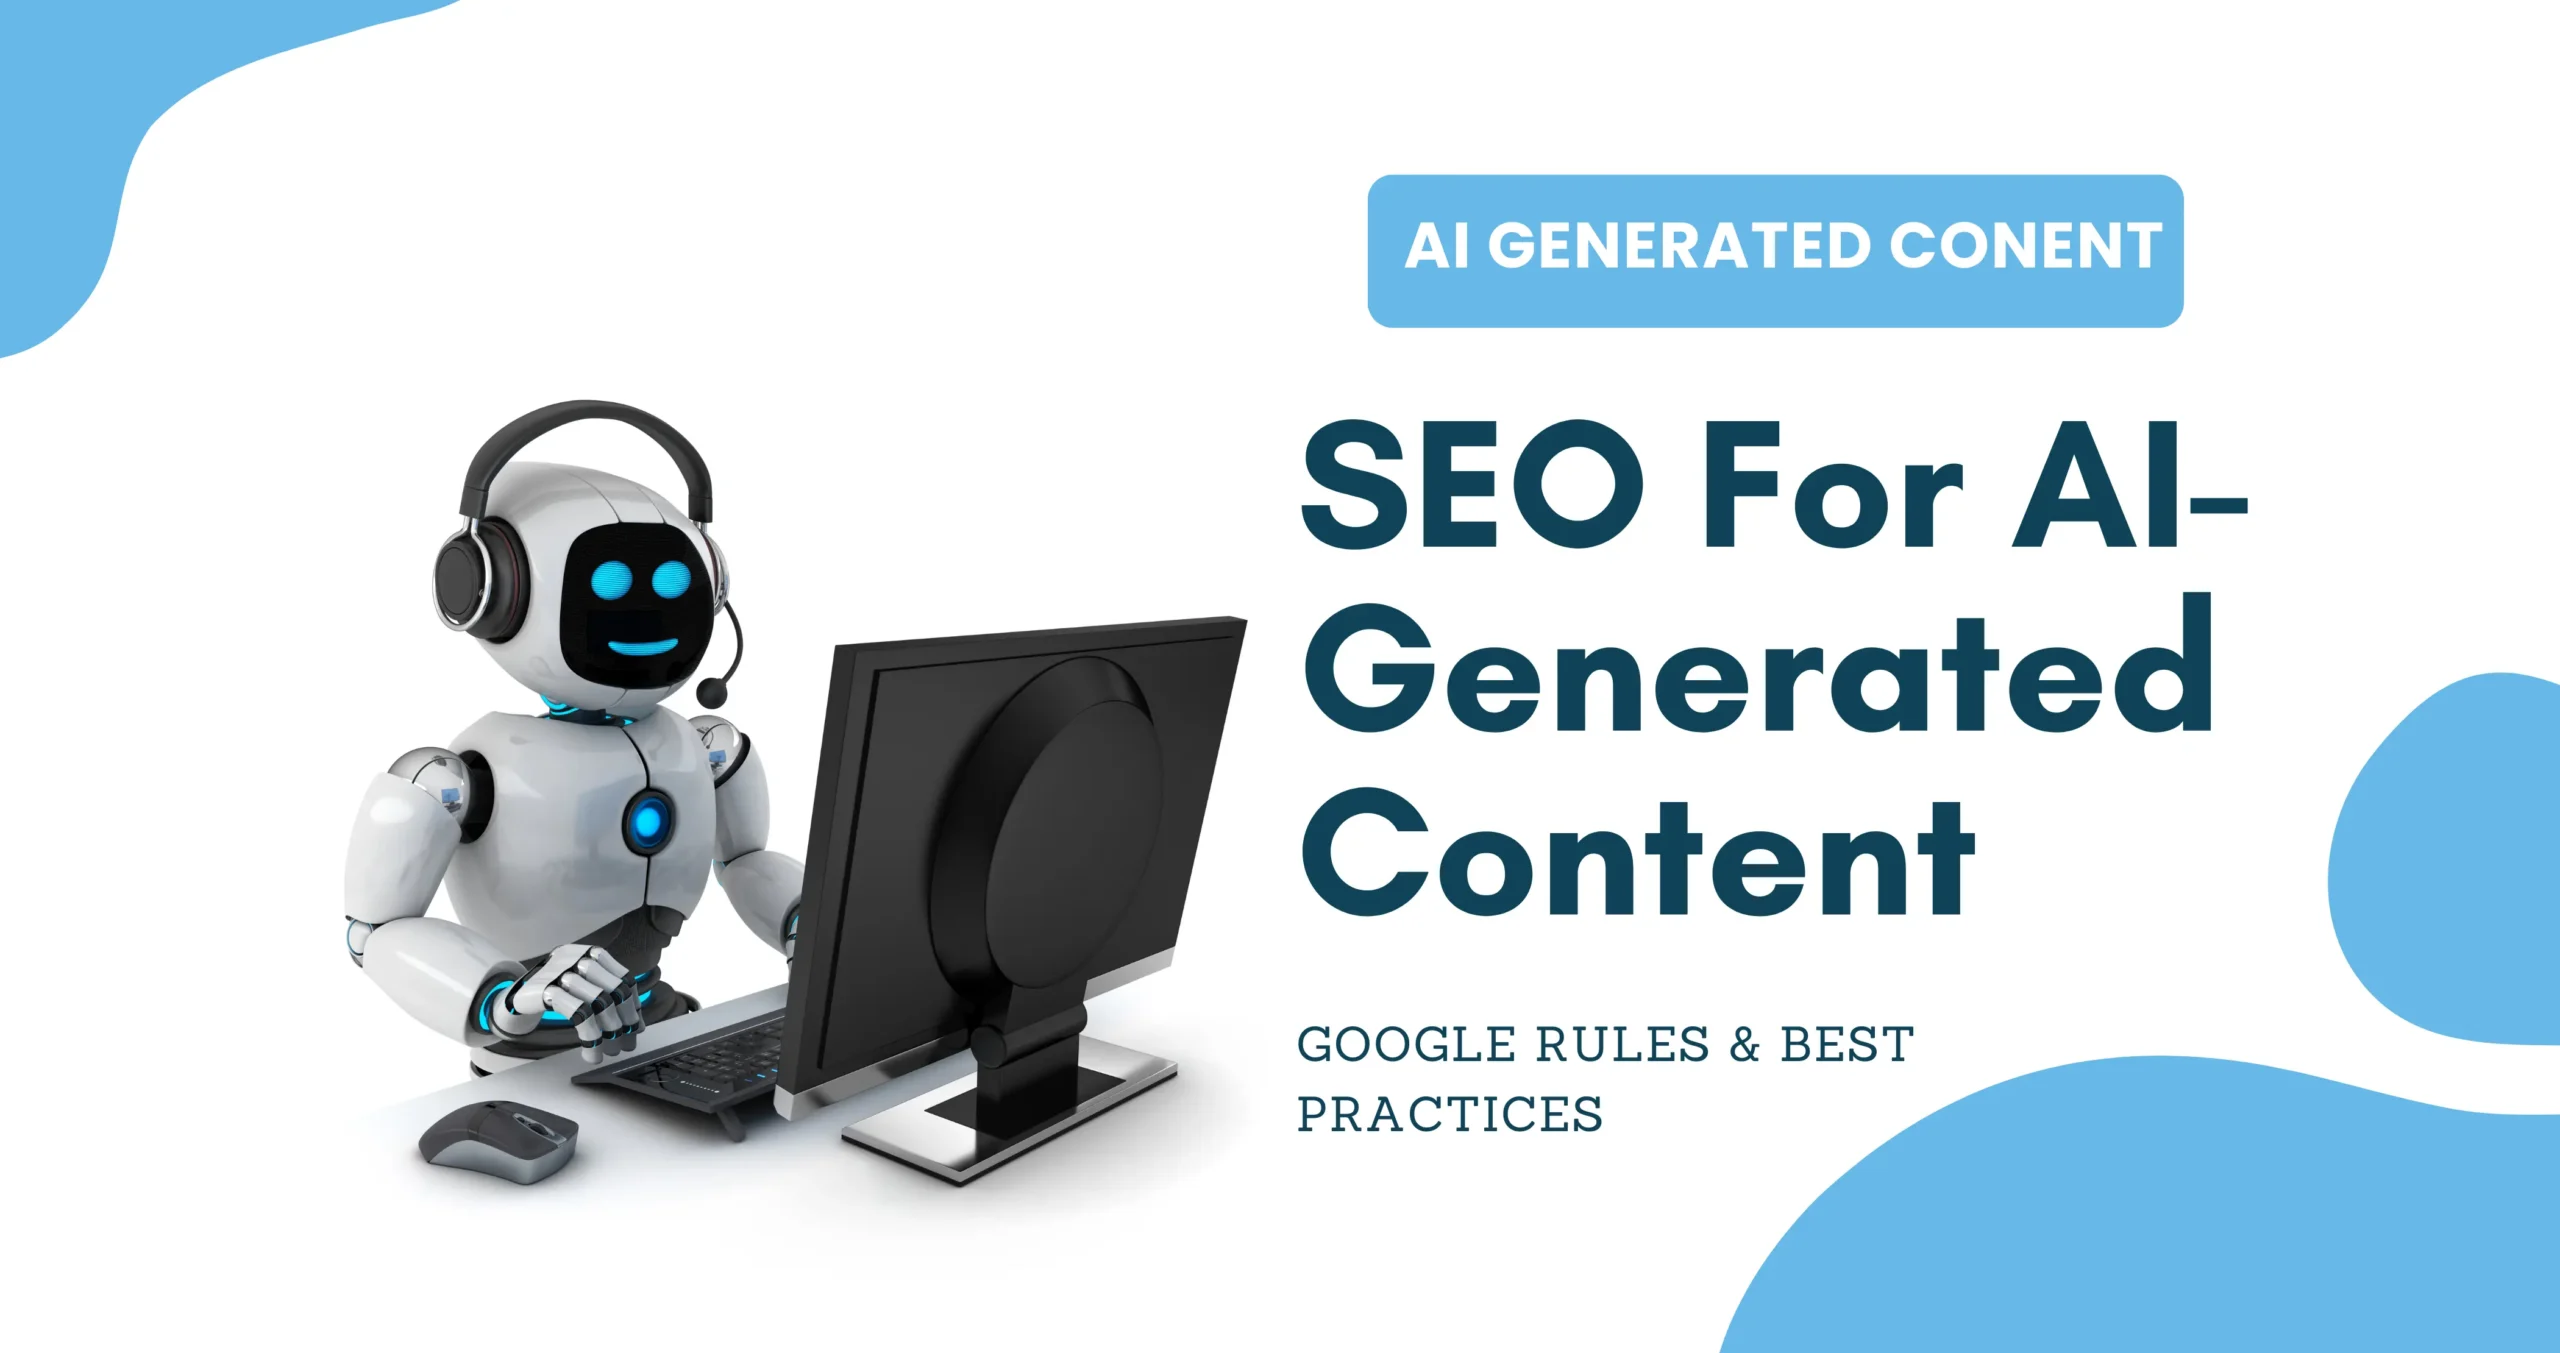 SEO For AI-Generated Content: Google Rules & Best Practices